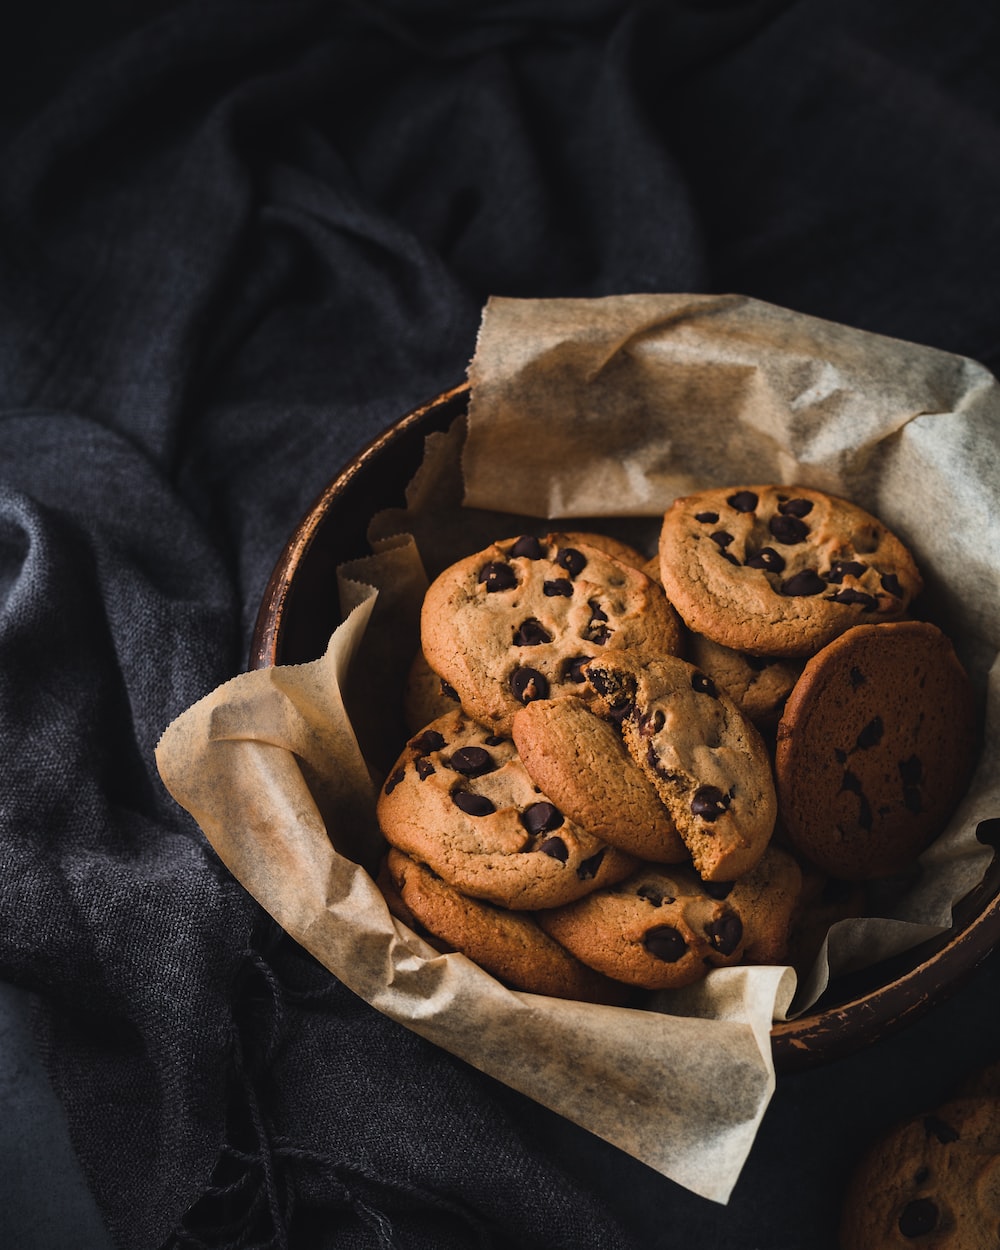 A basket of chocolate chip cookies on a black cloth. - Bakery